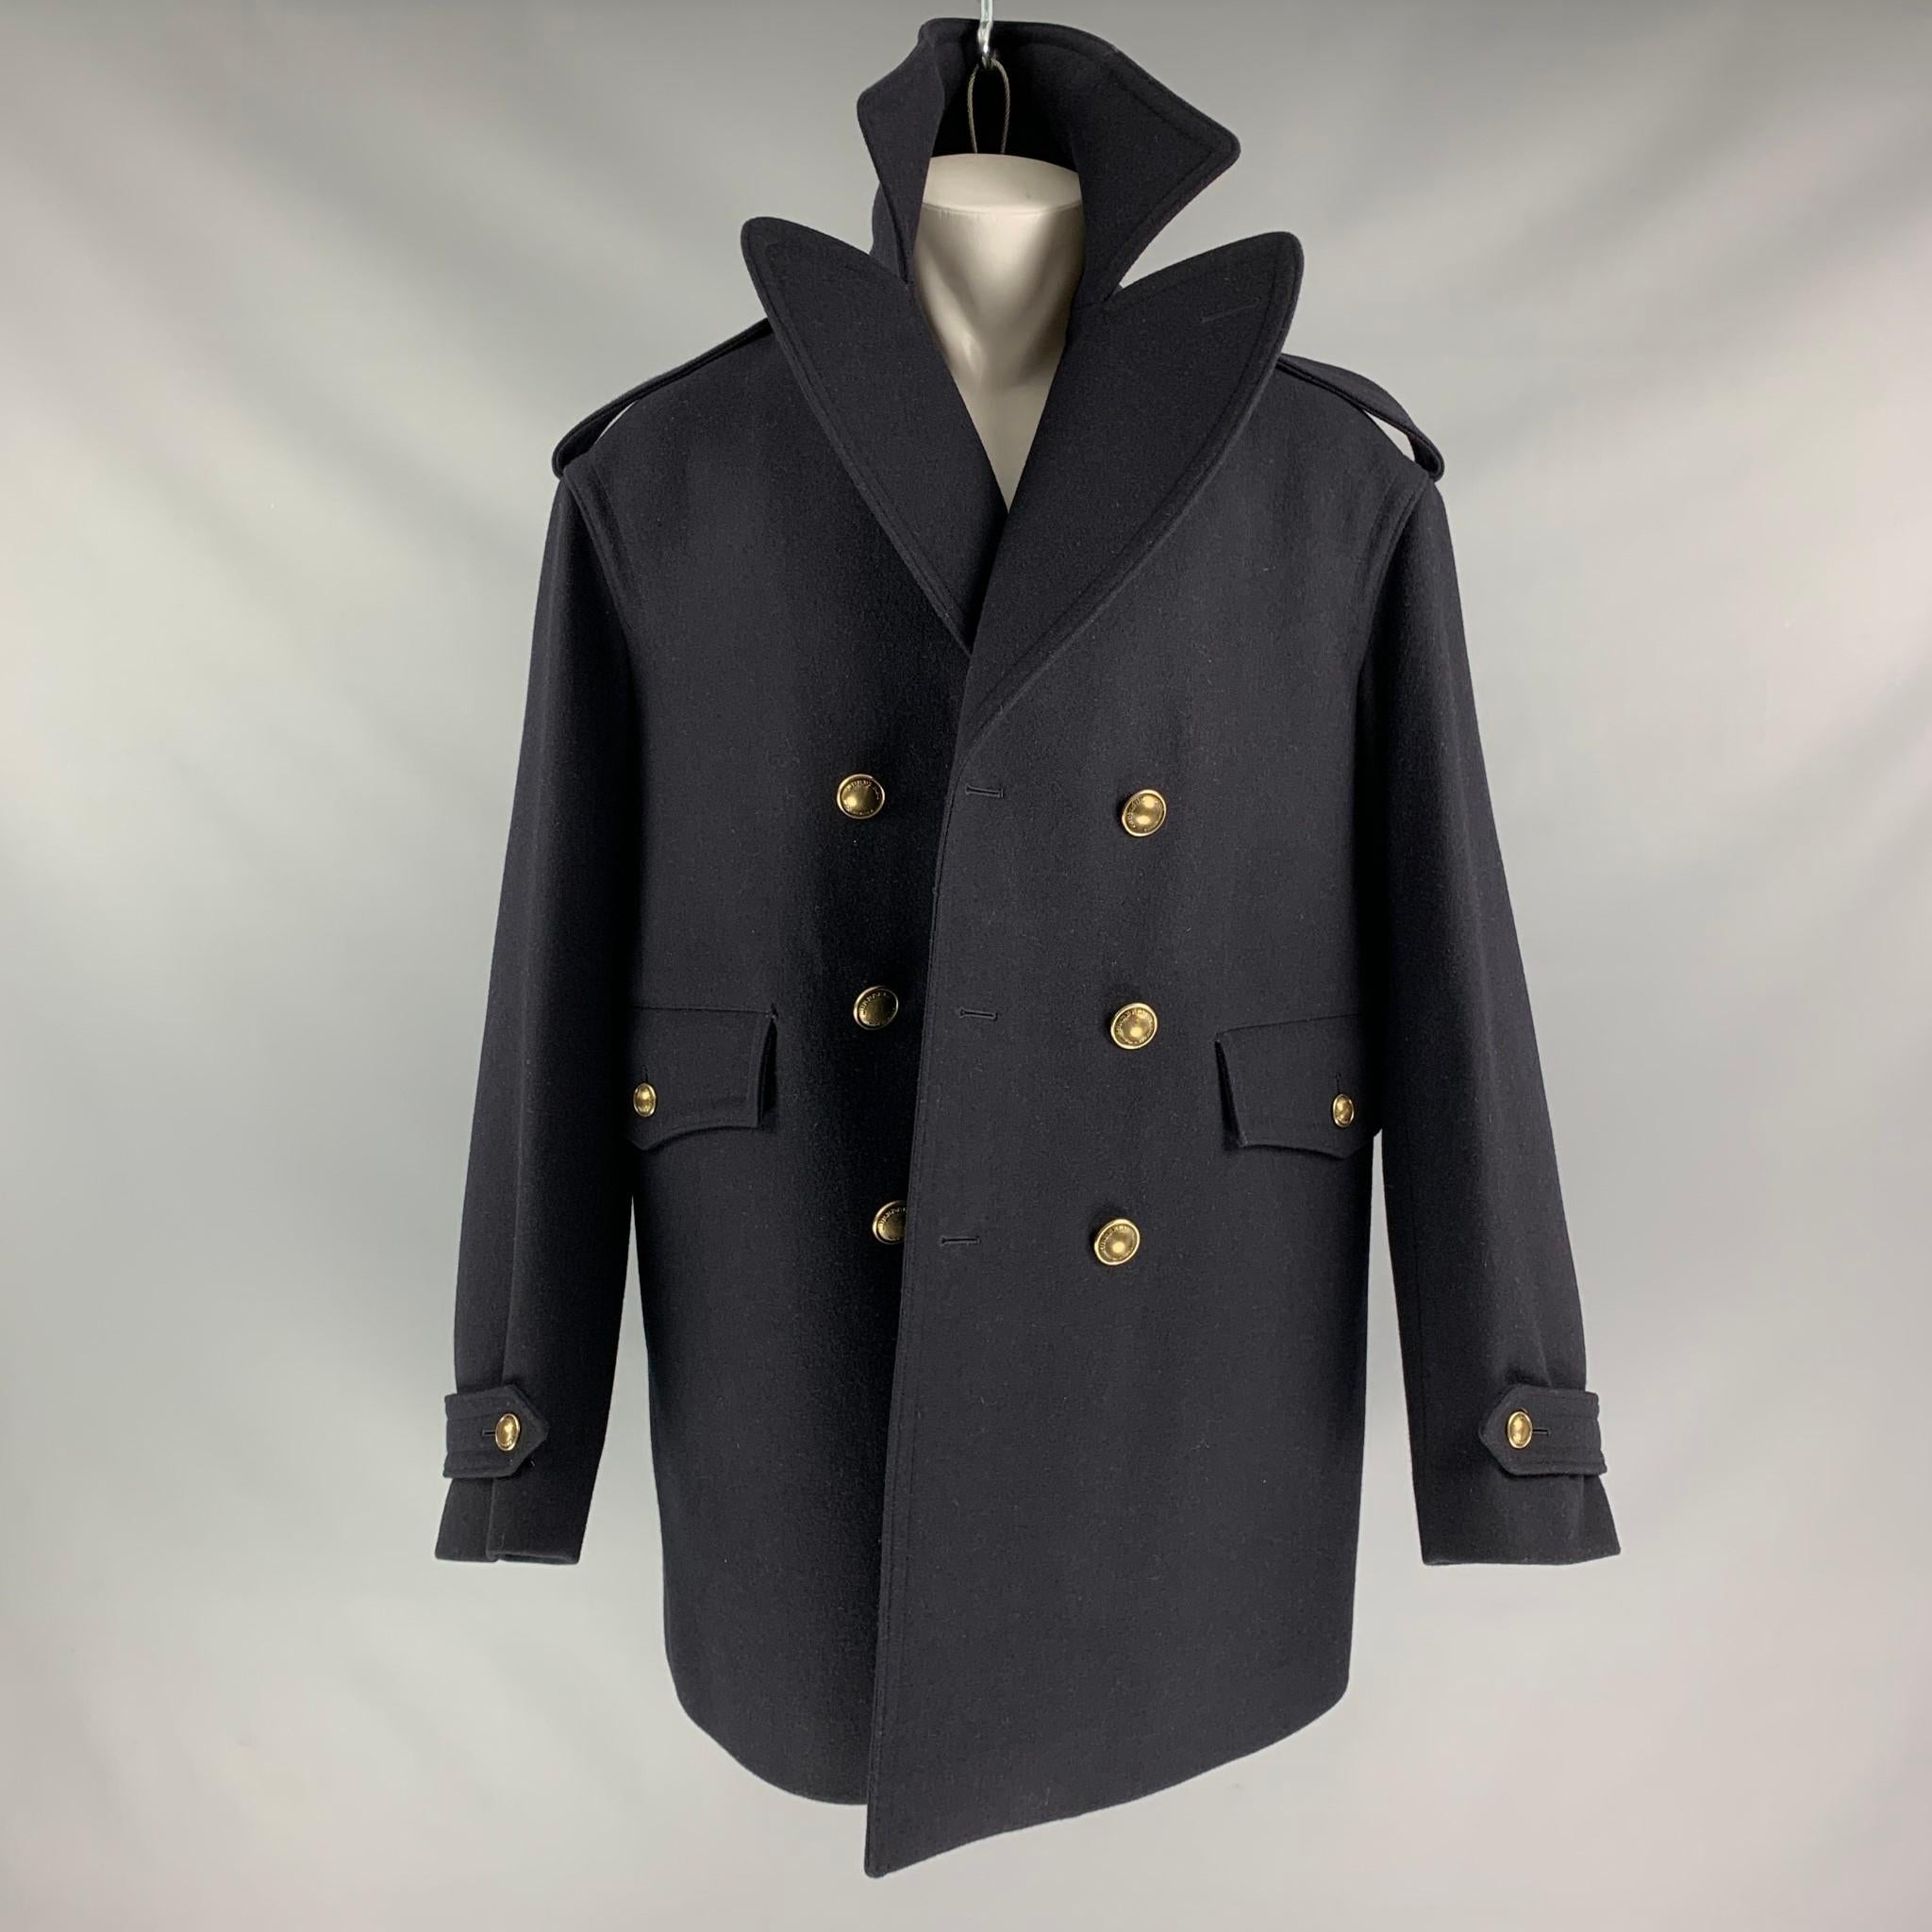 Black BURBERRY PRORSUM Fall 2010 M/L Oversized Navy Blue Wool Double Breasted Coat